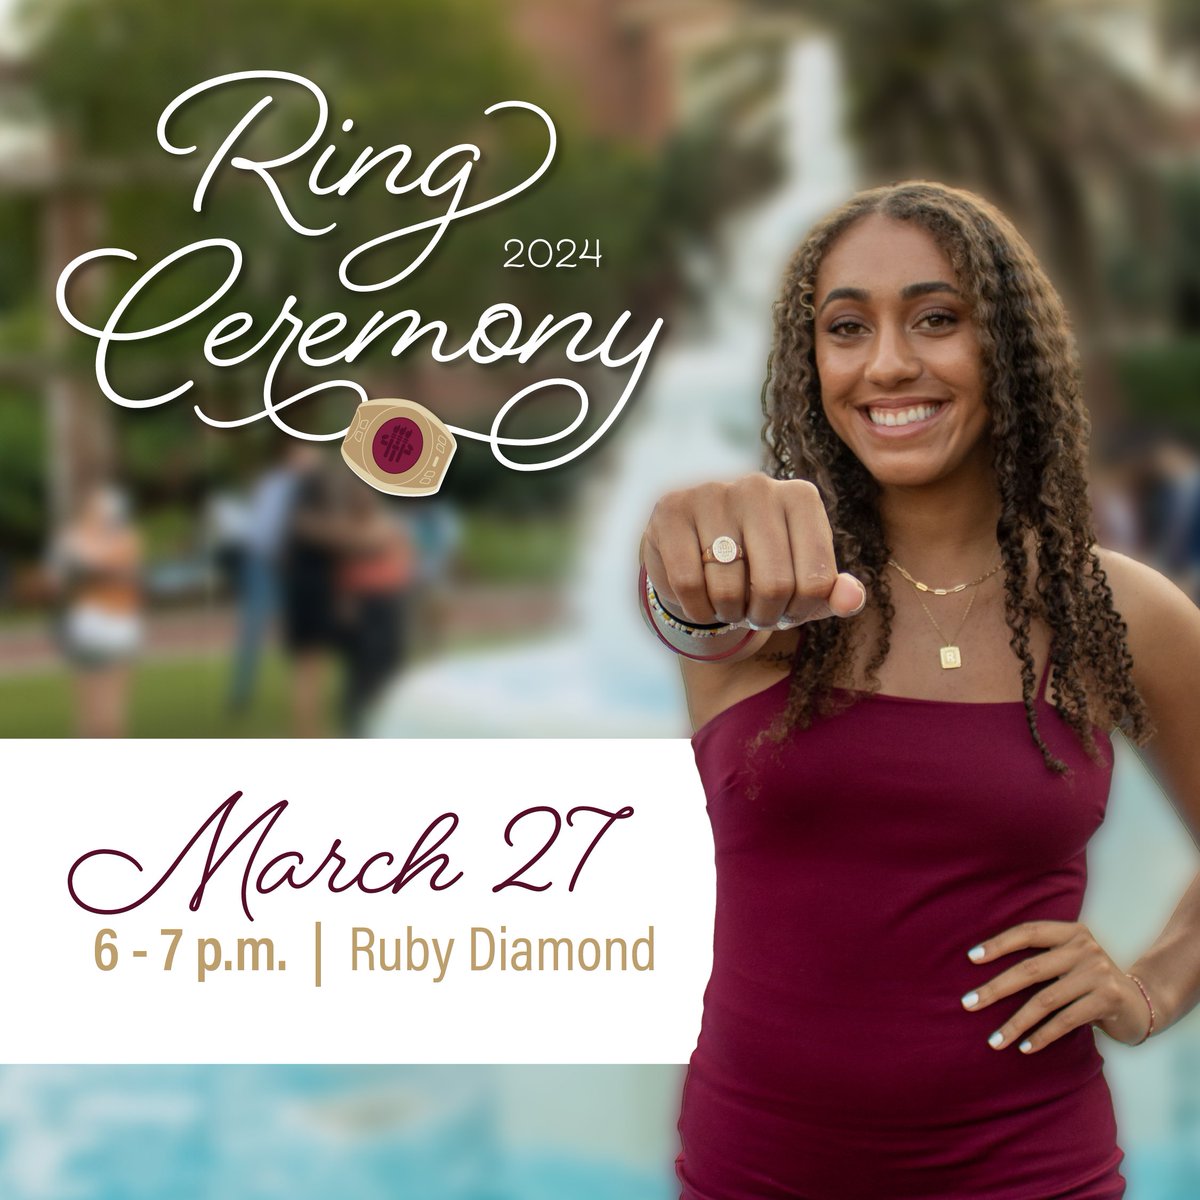 Let the traditions continue! Join students during the @floridastate Ring Ceremony this Mar. 27 at Ruby Diamond and Westcott Plaza from 6 - 7 p.m. as they honor and celebrate their FSU experience! #FSUTraditions #GoNoles